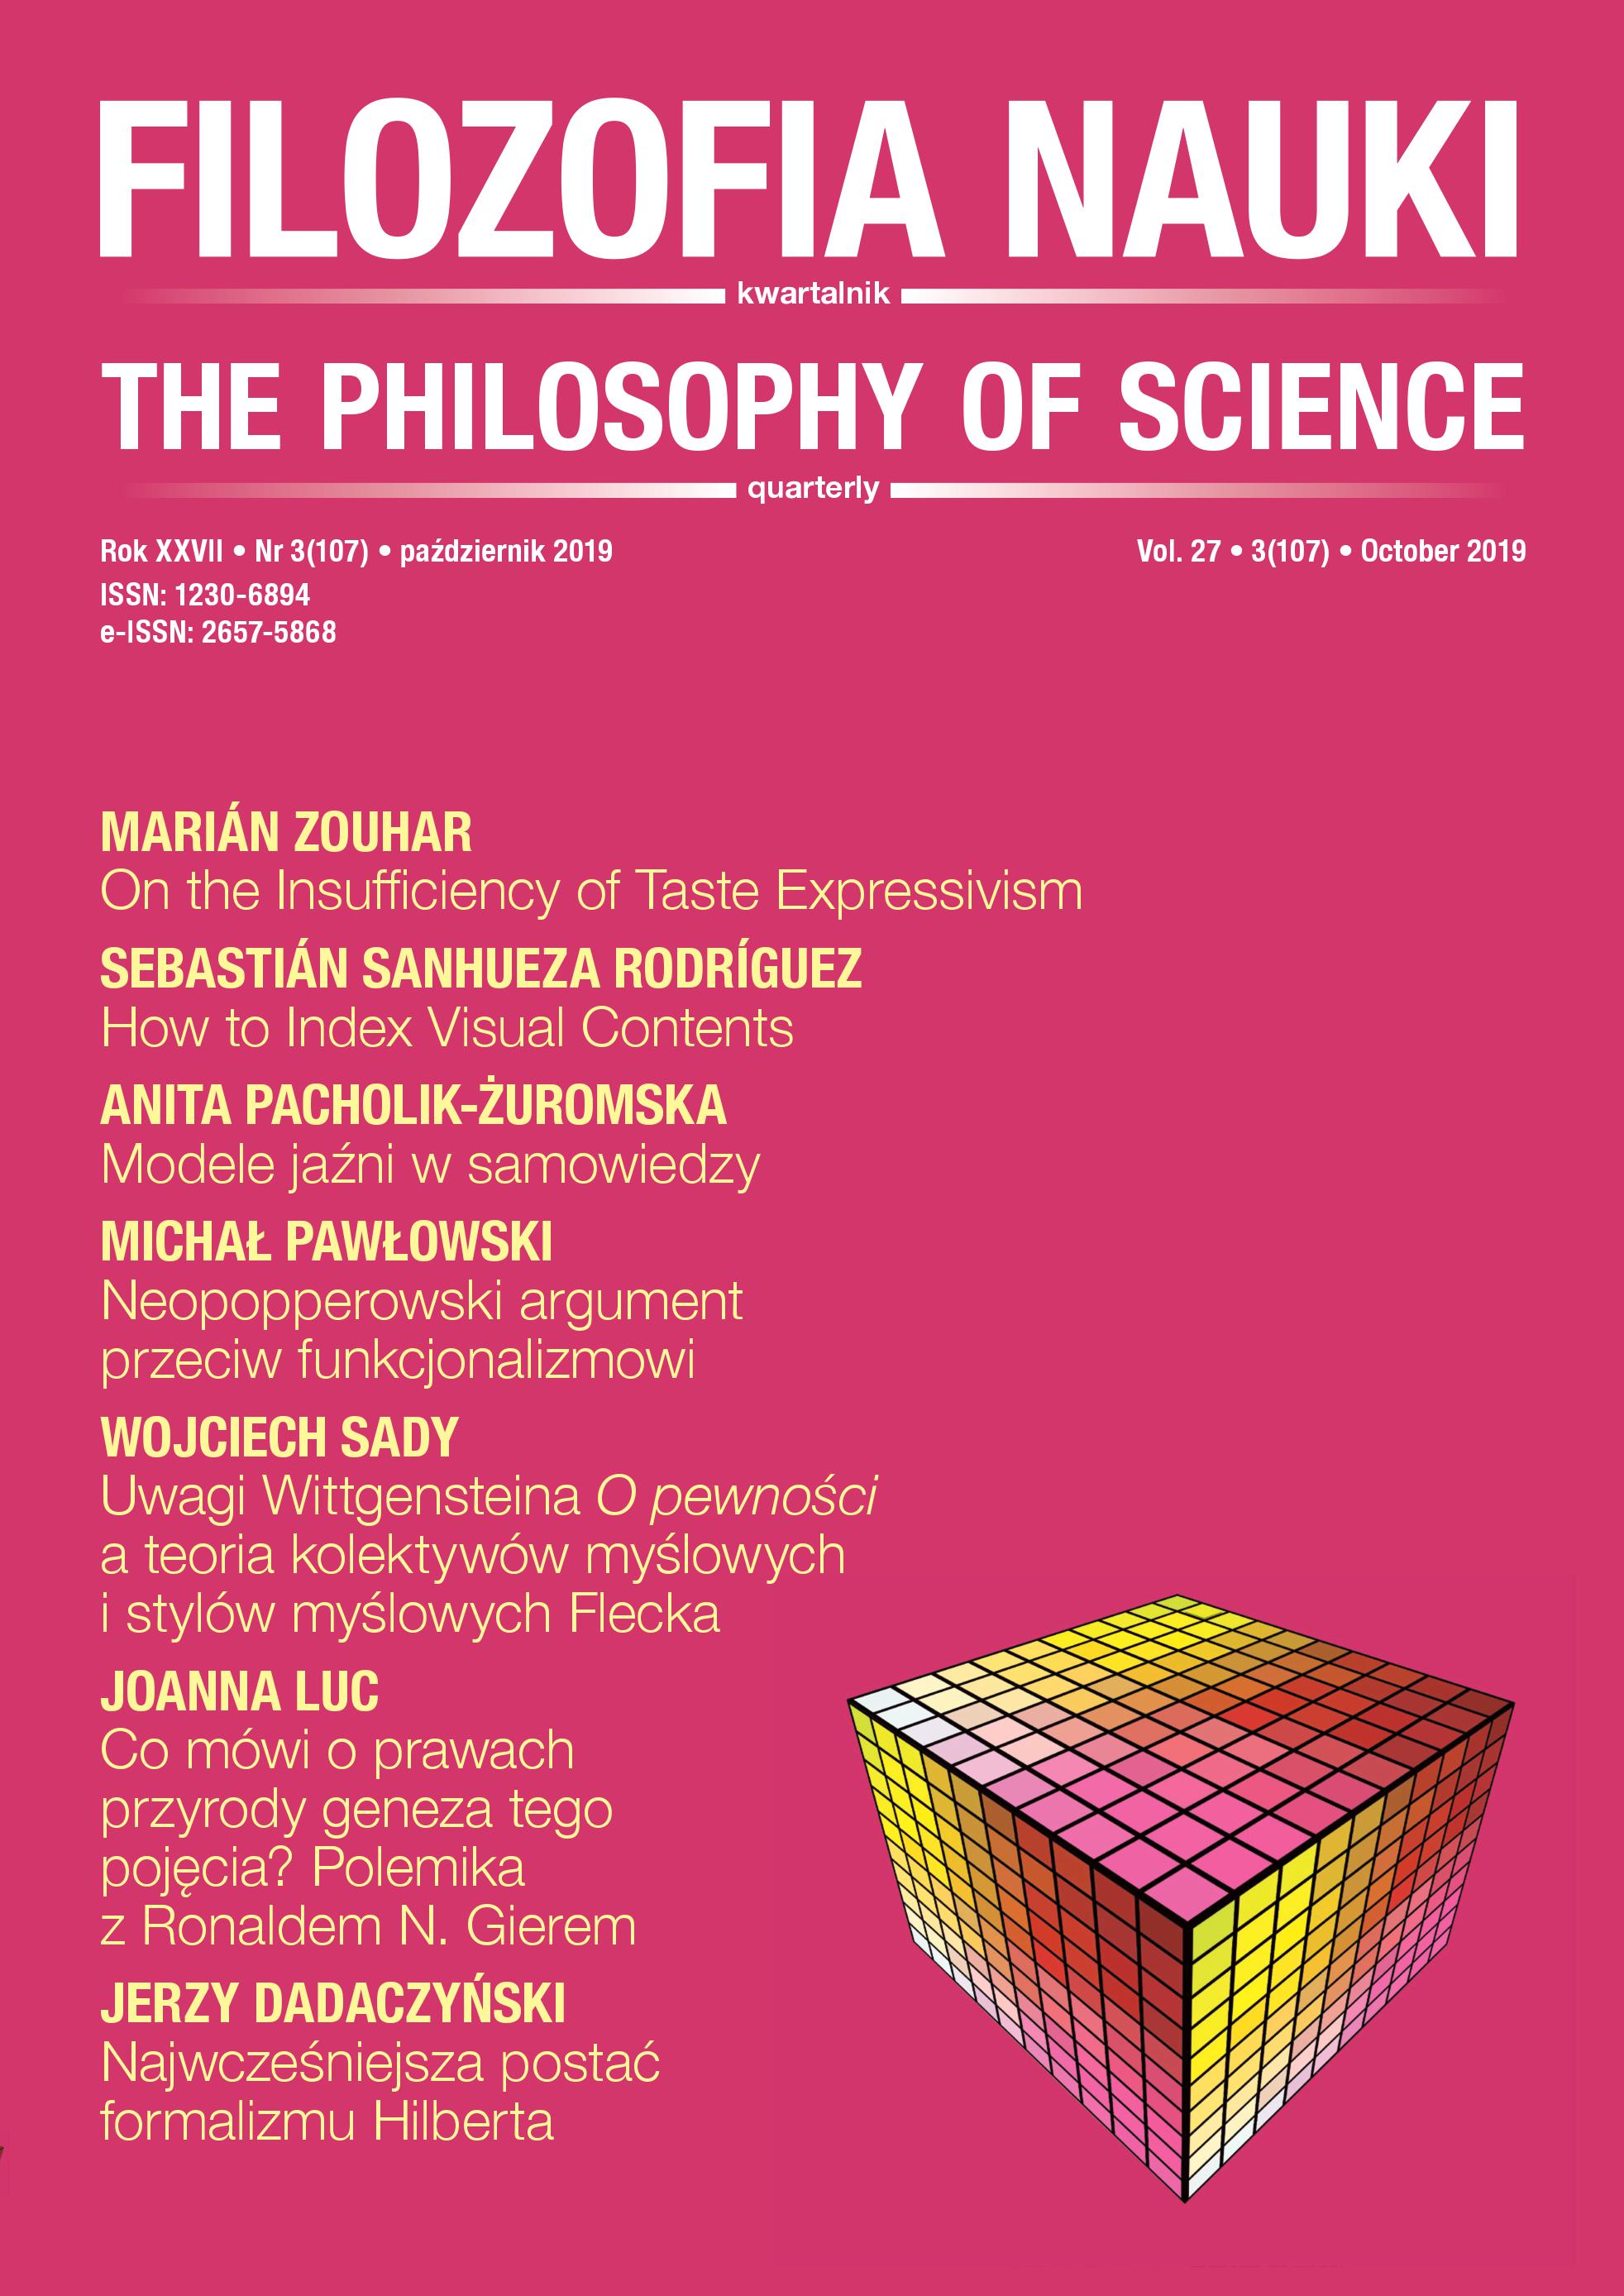 					View Vol. 27 No. 3 (2019): THE PHILOSOPHY OF SCIENCE
				